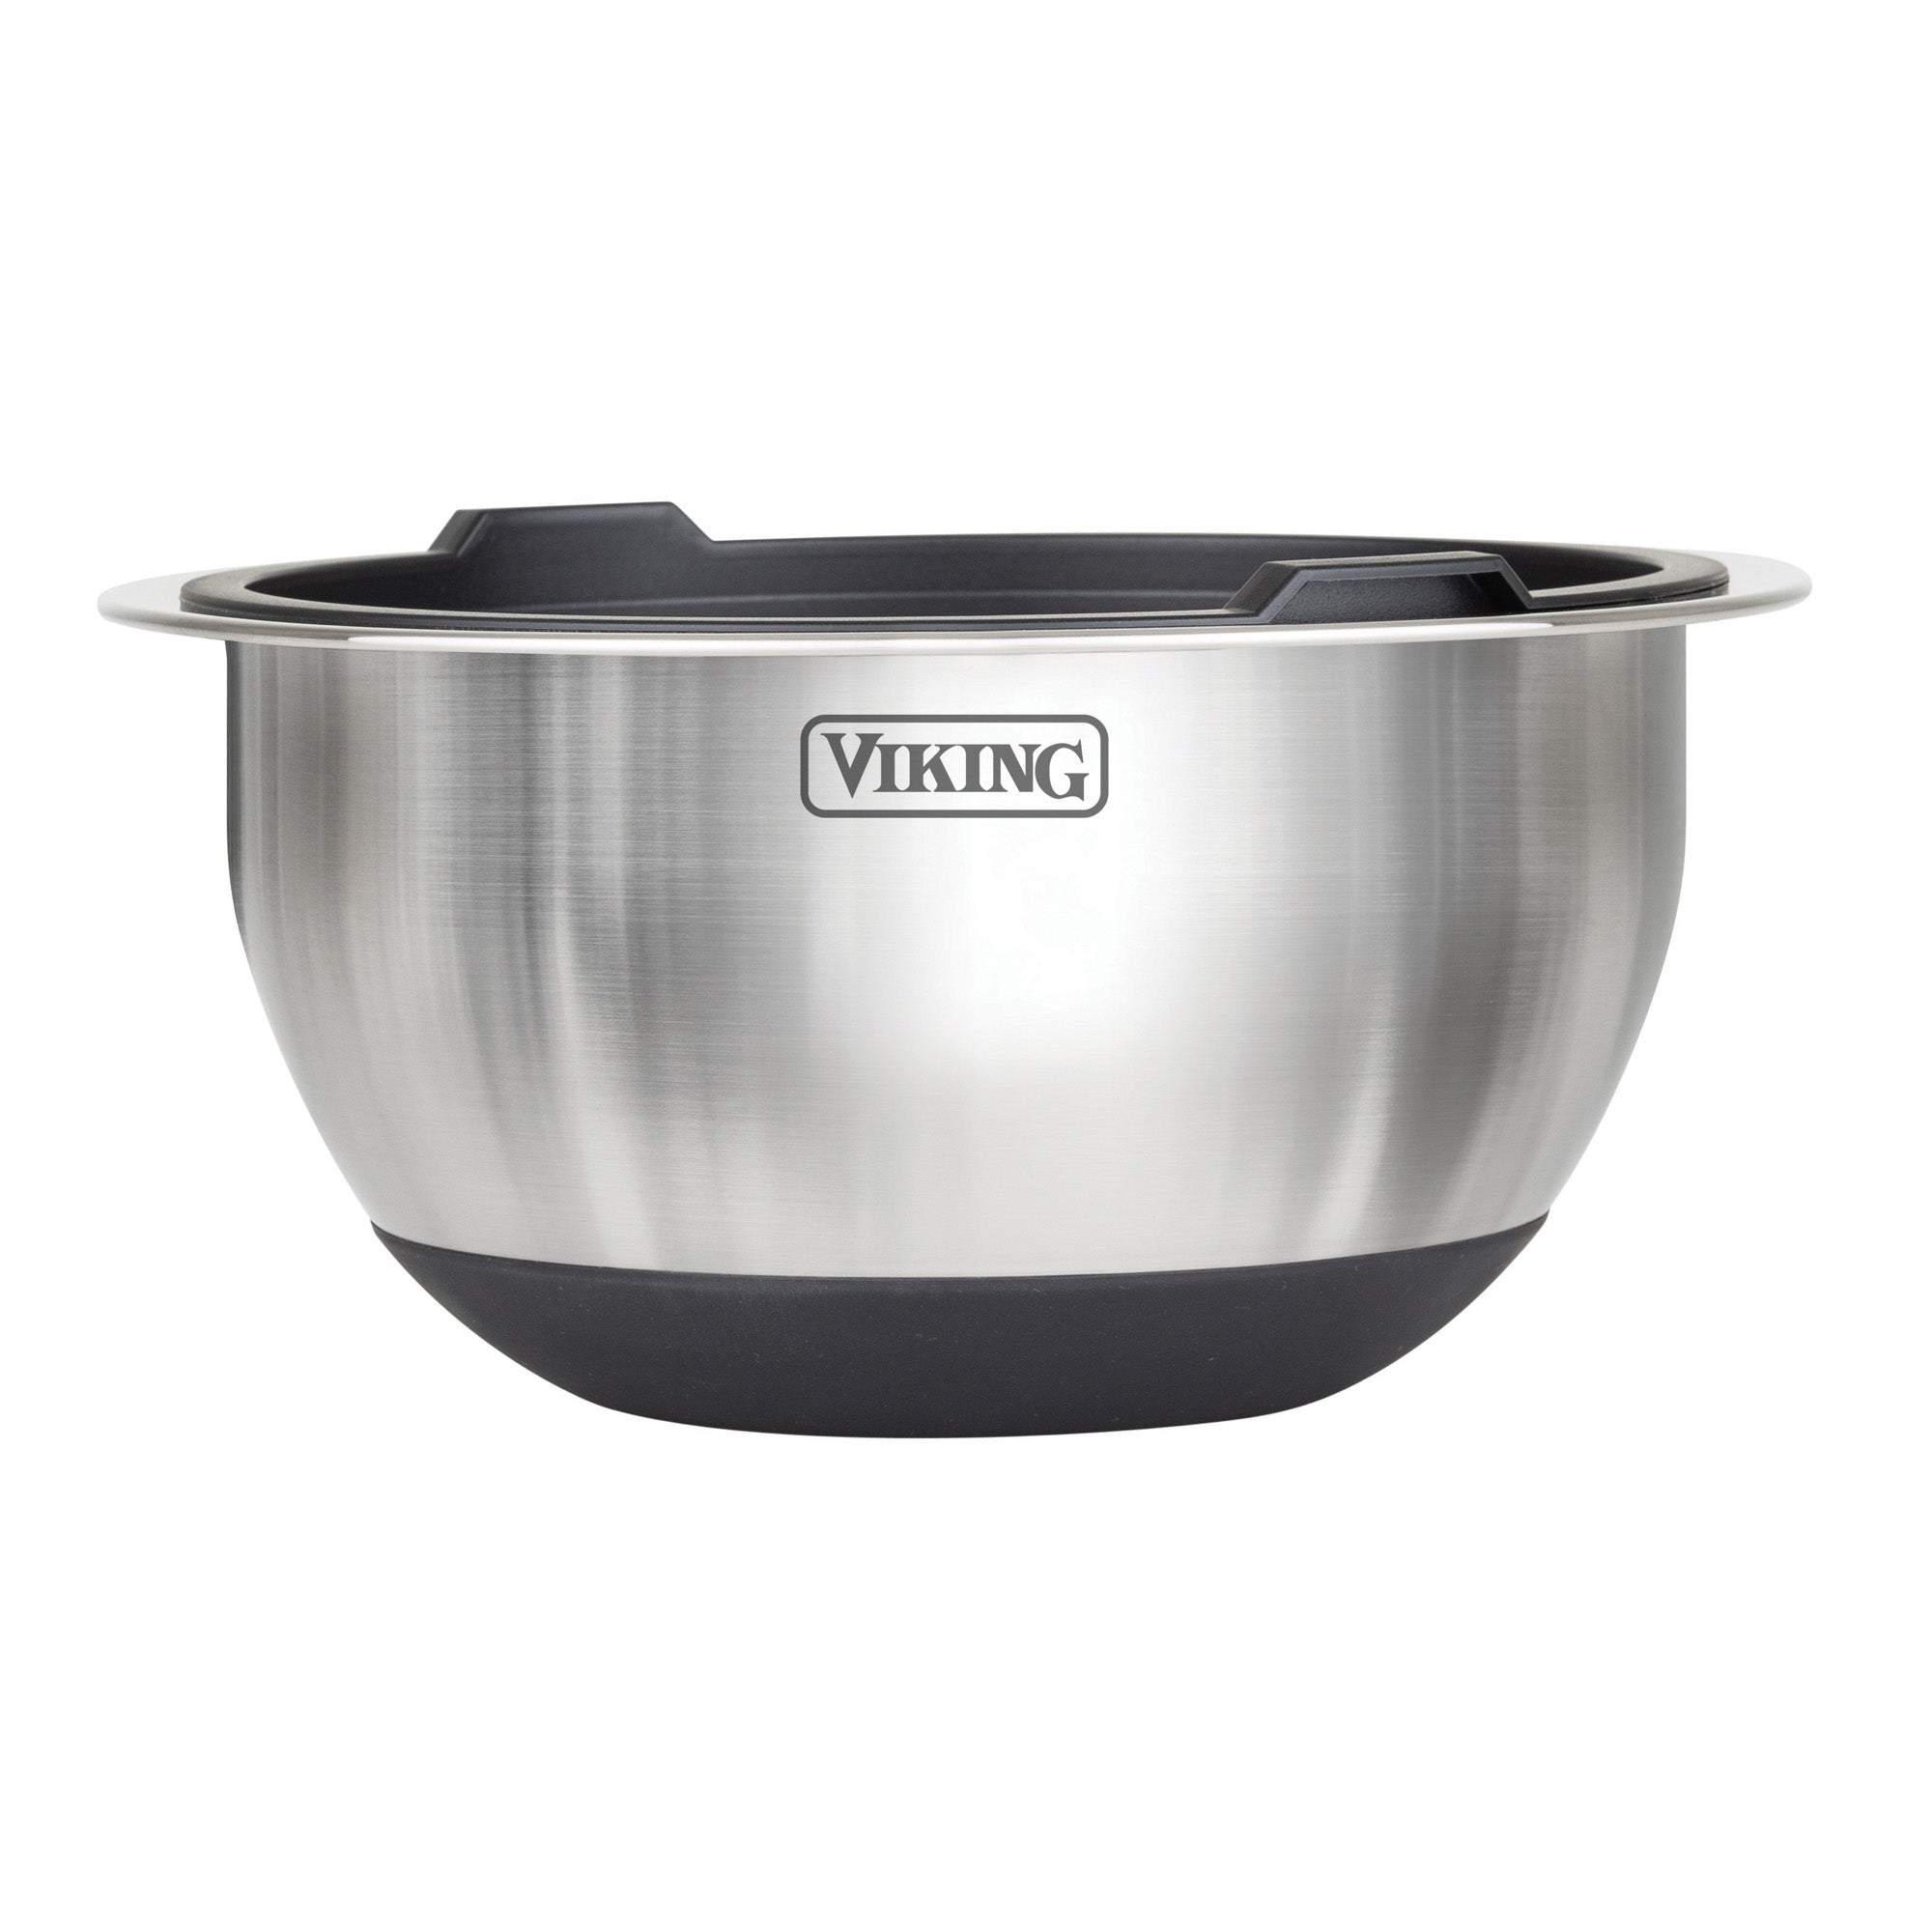 Viking 10-Piece Stainless Steel Mixing Bowl Set with Lids, Black